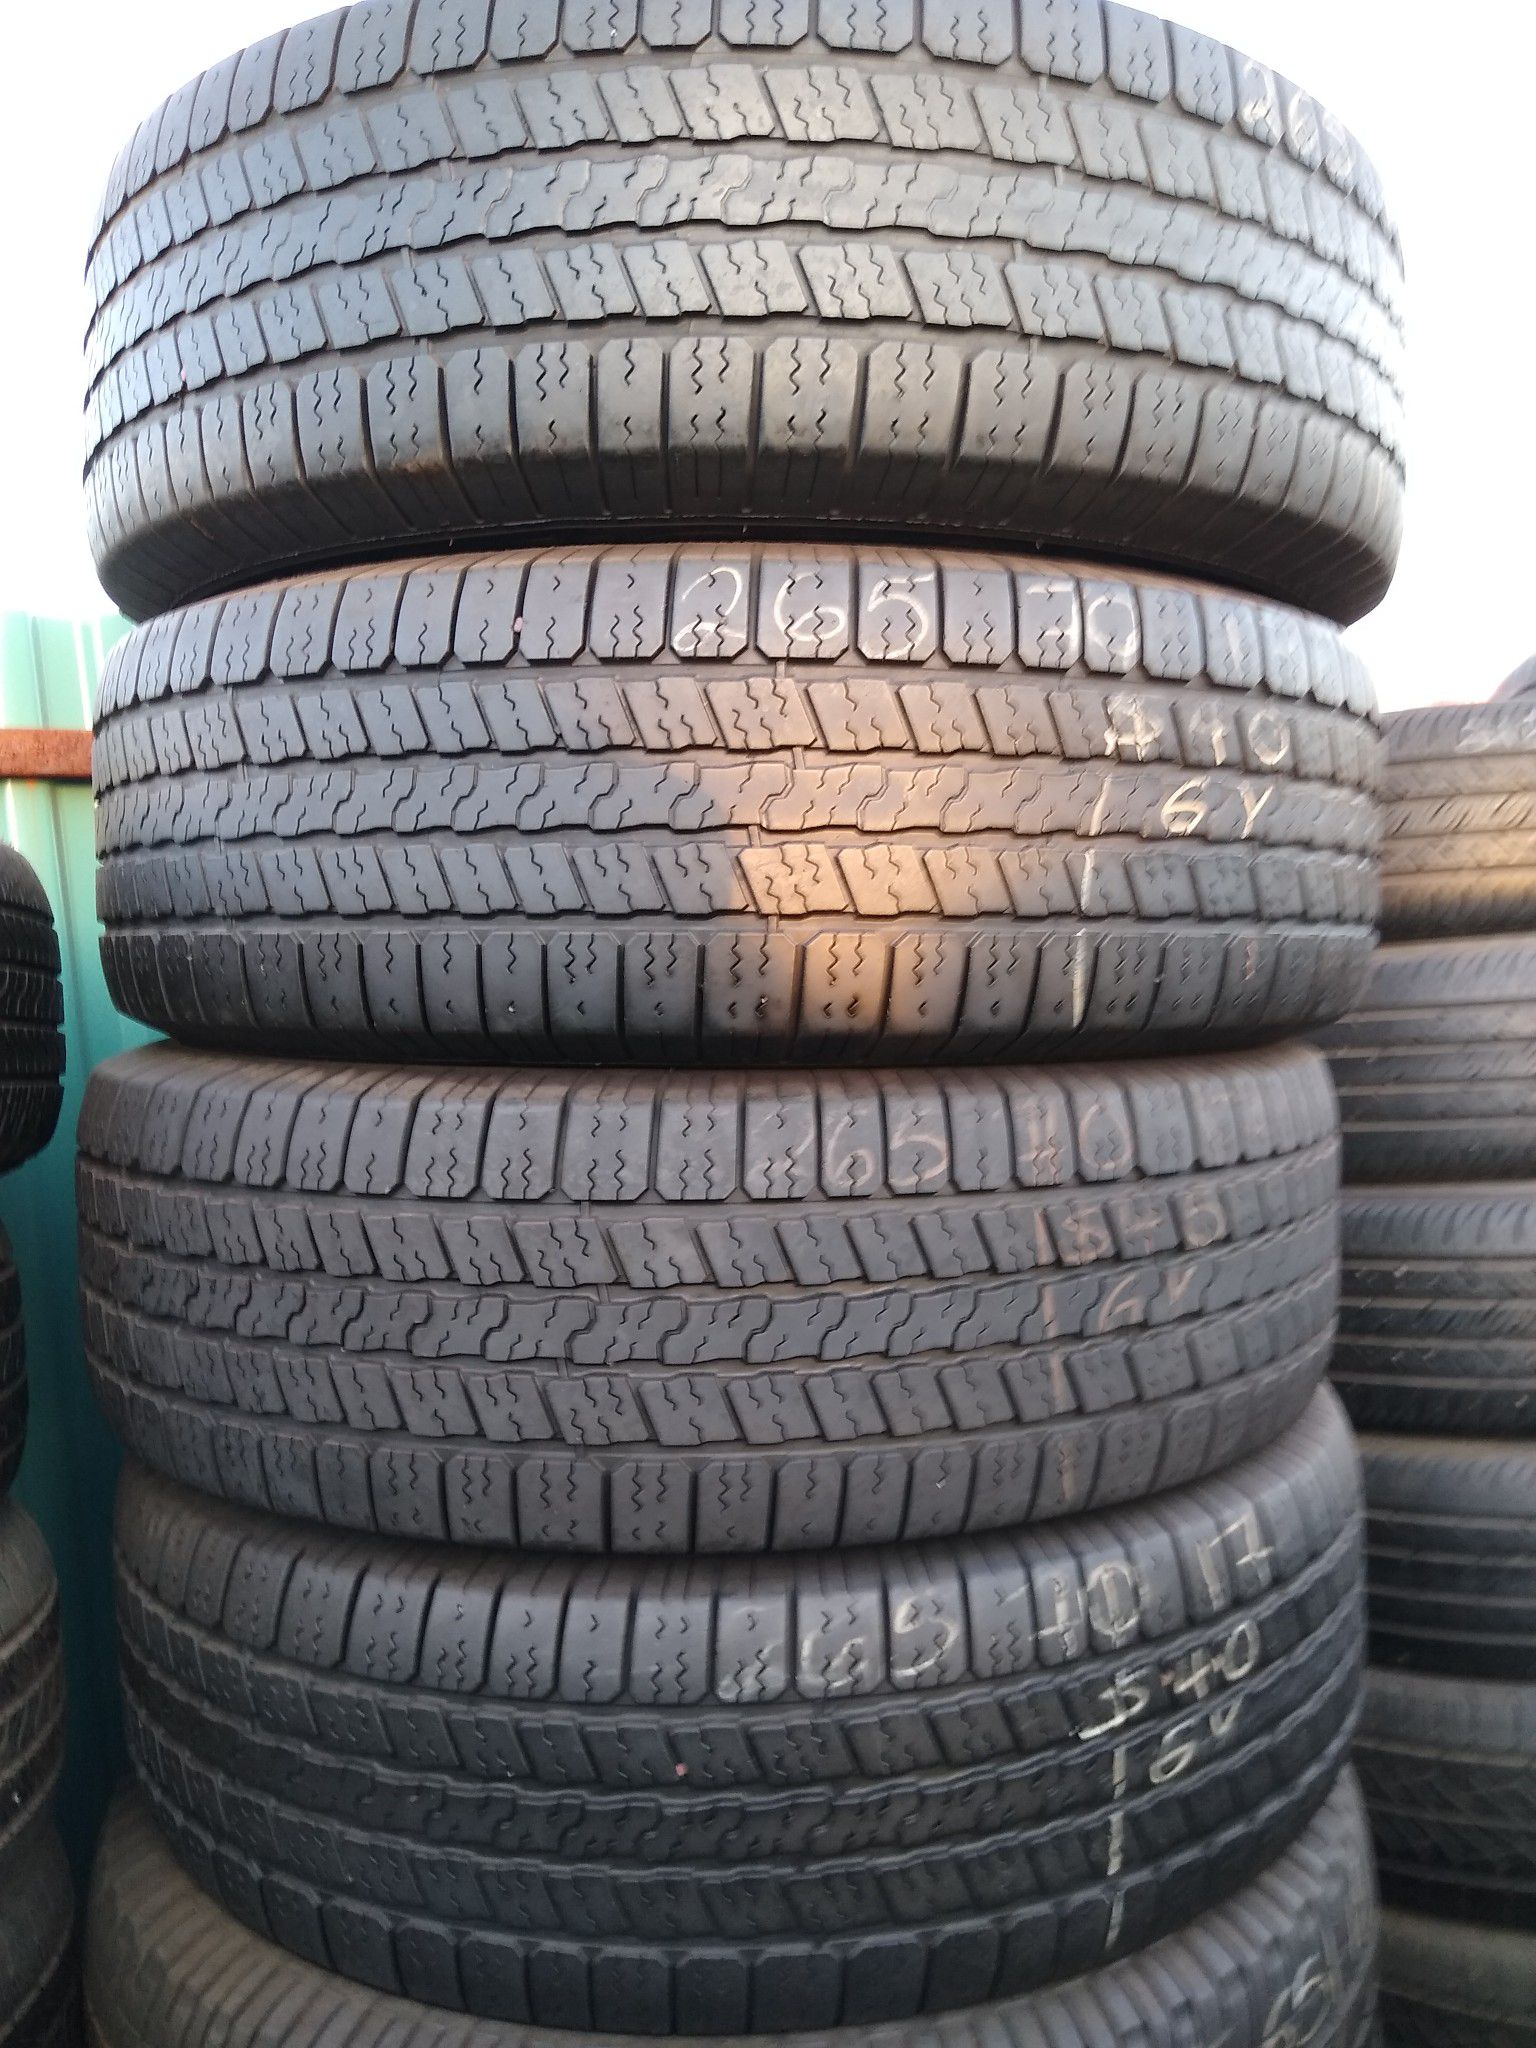 4 used Goodyear truck tires 265/70/17 all 4 for $150 Free installation and balance